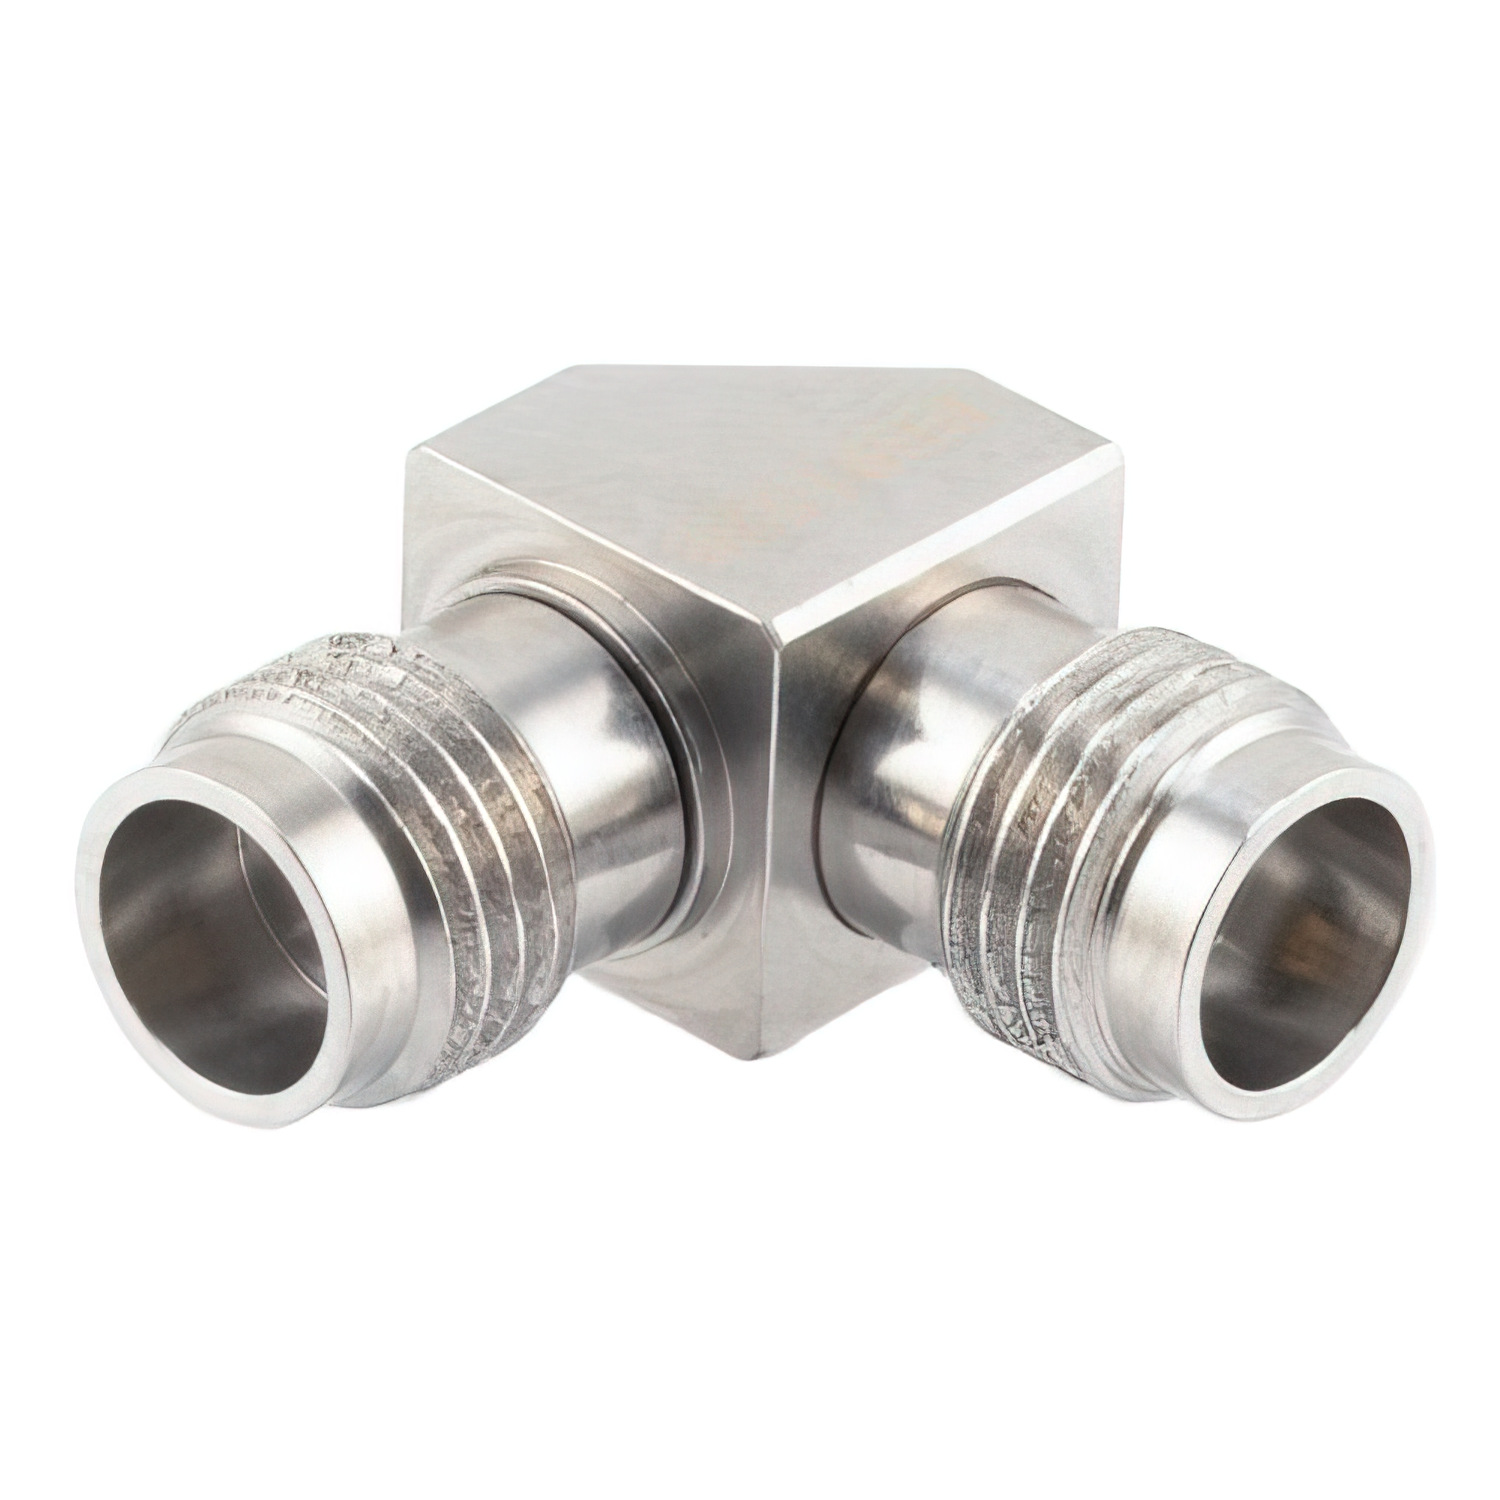 2.4mm Female to 2.4mm Female Miter Right Angle Adapter2